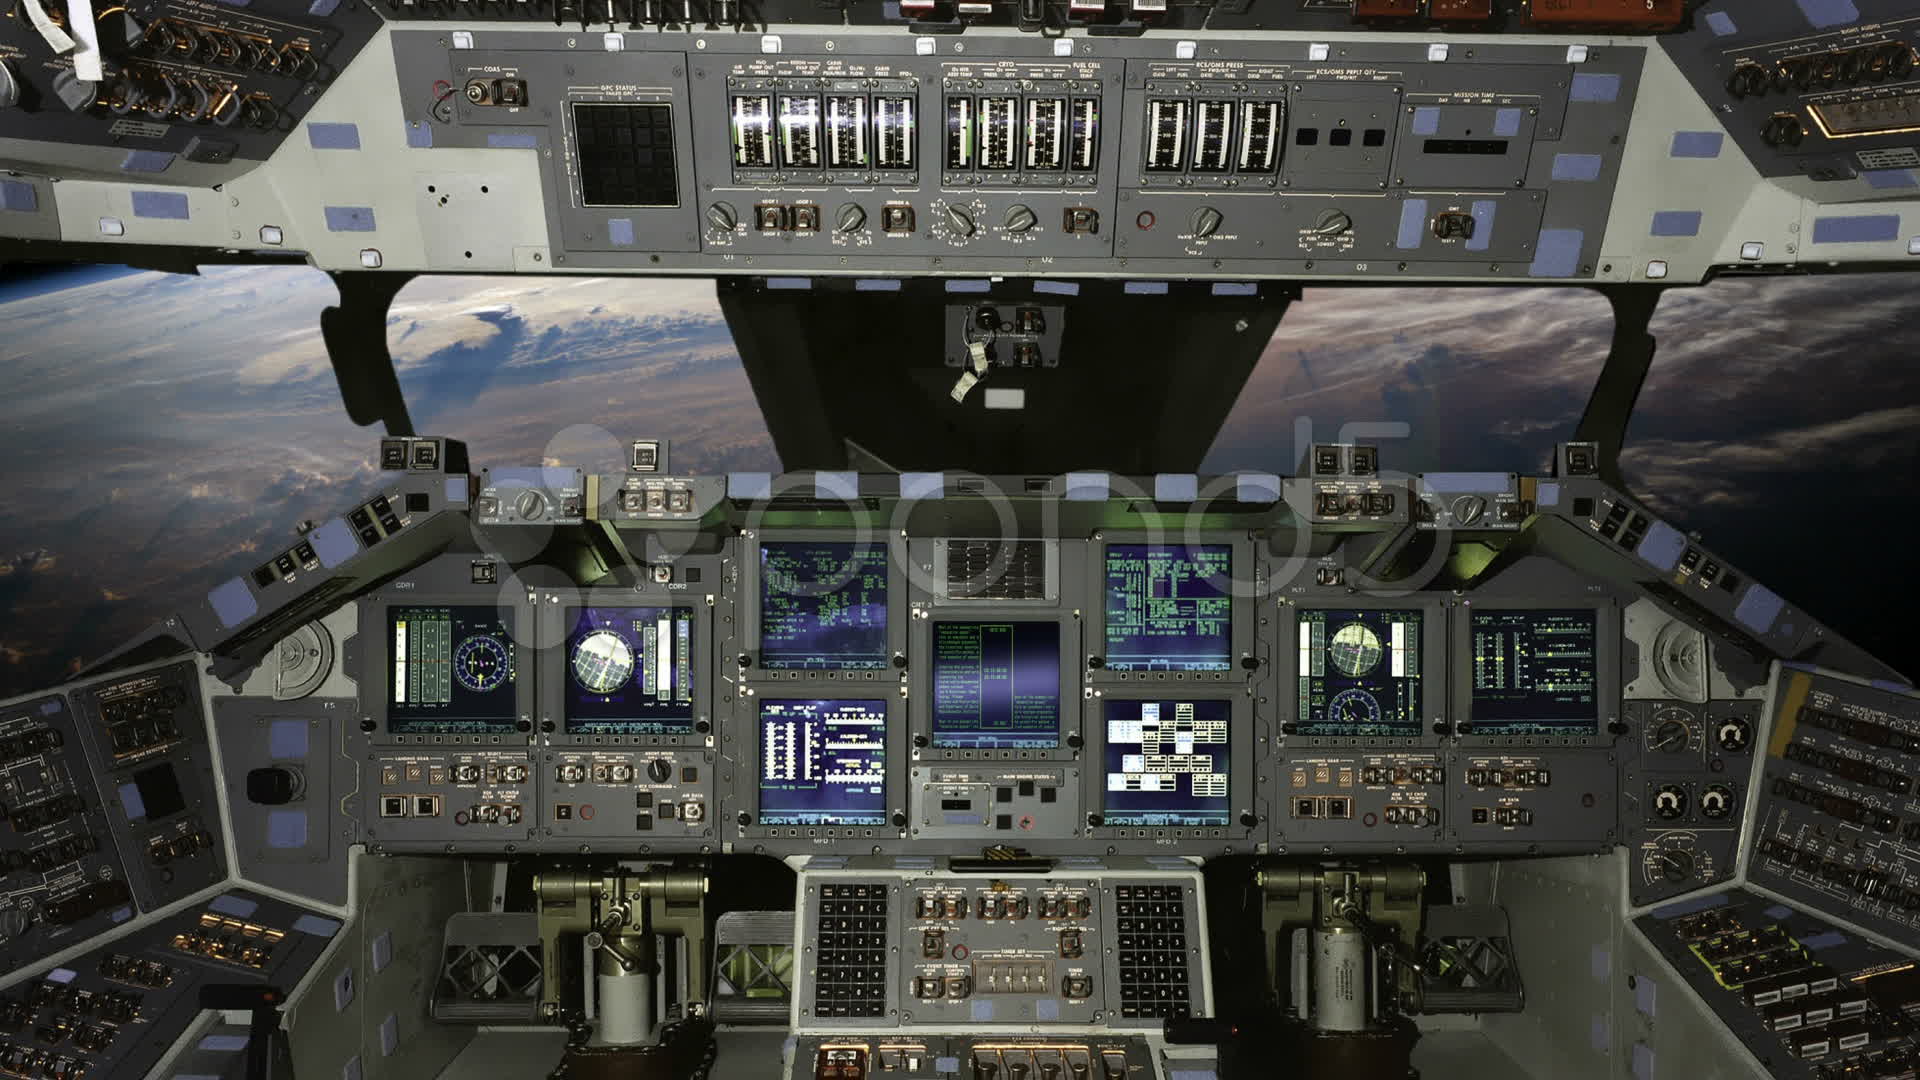 Video: Space Shuttle cockpit view with instruments, gauges, and view